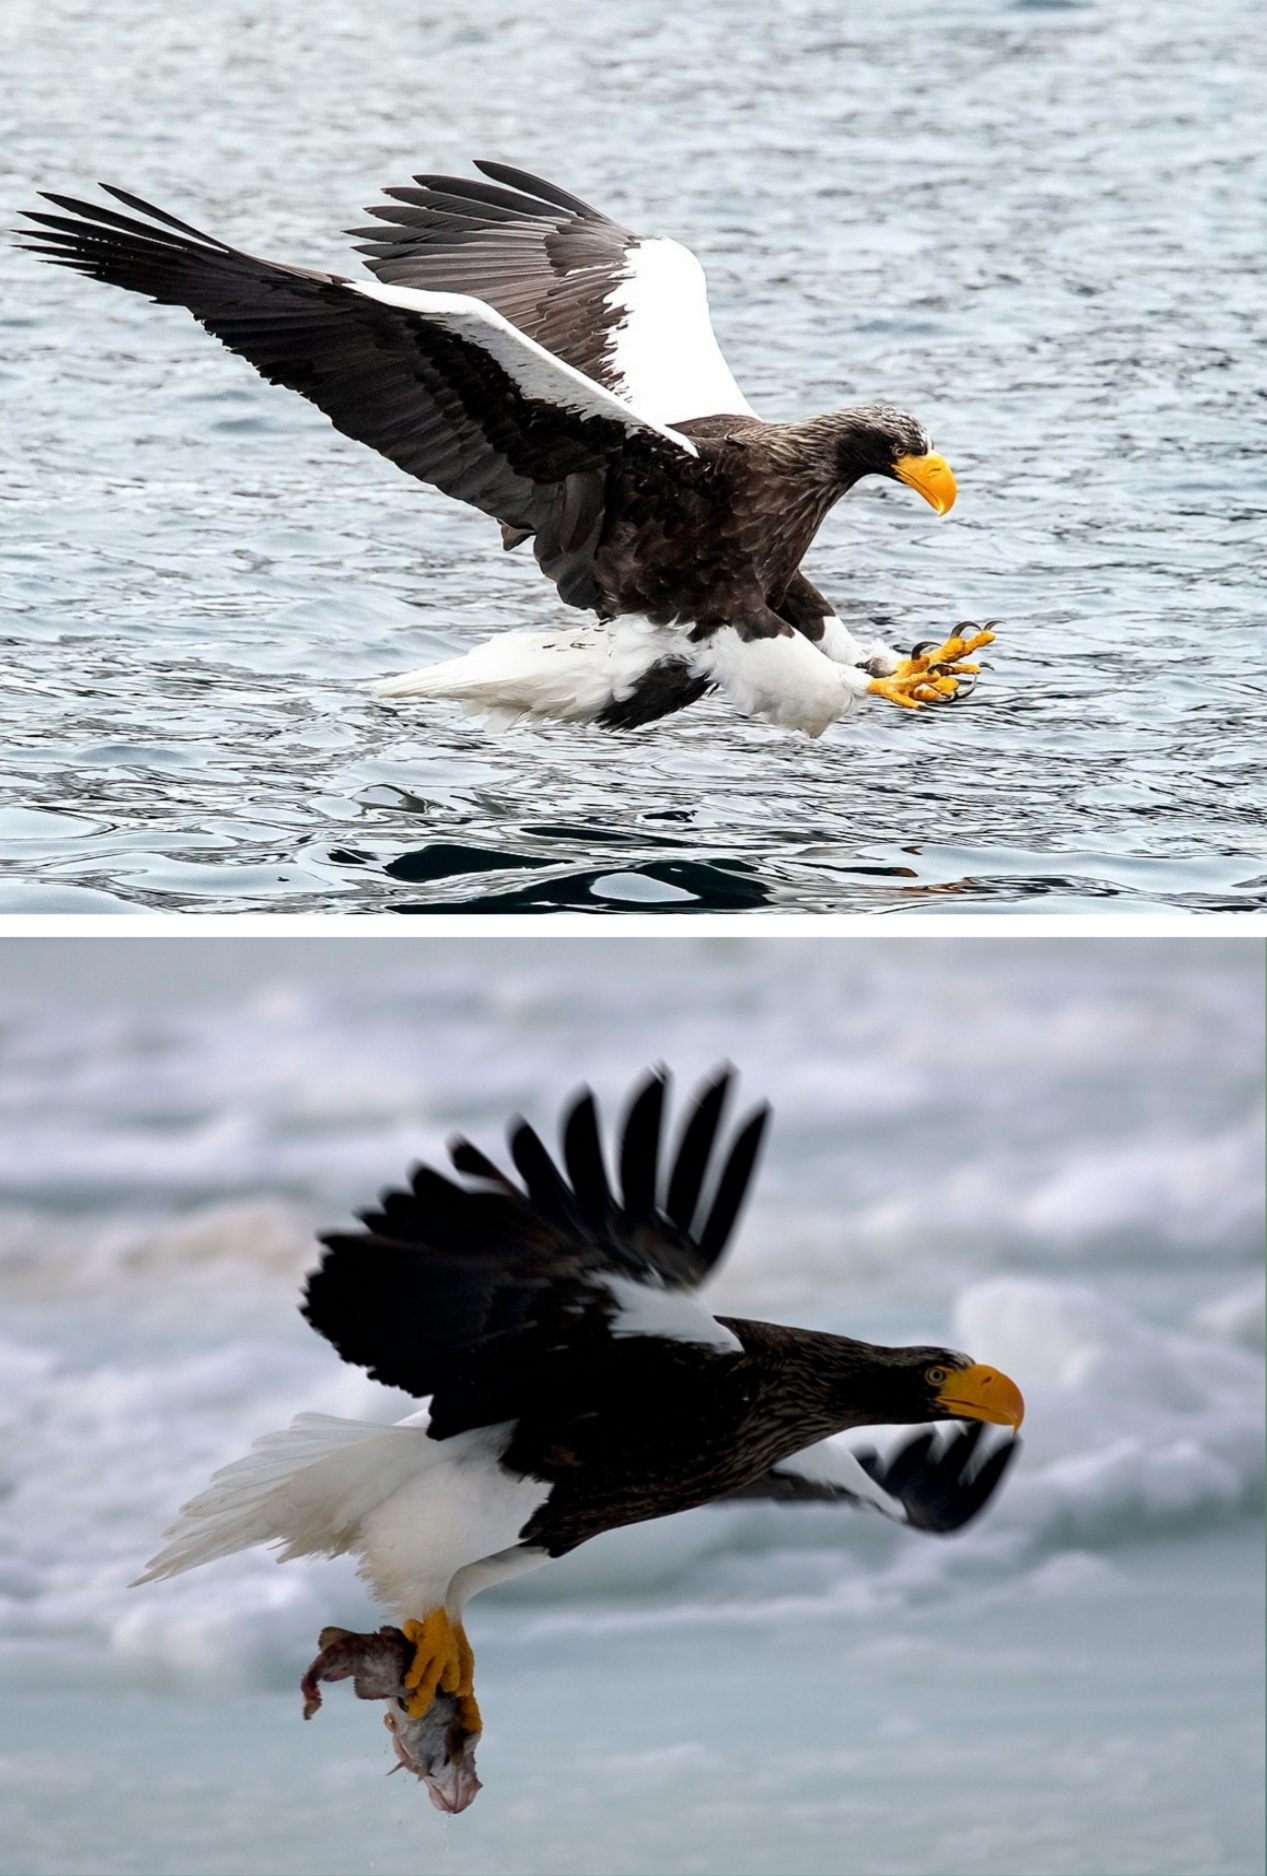 https://upload.wikimedia.org/wikipedia/commons/a/ab/Steller%27s_Sea_Eagle_hunting_a_fish.jpg